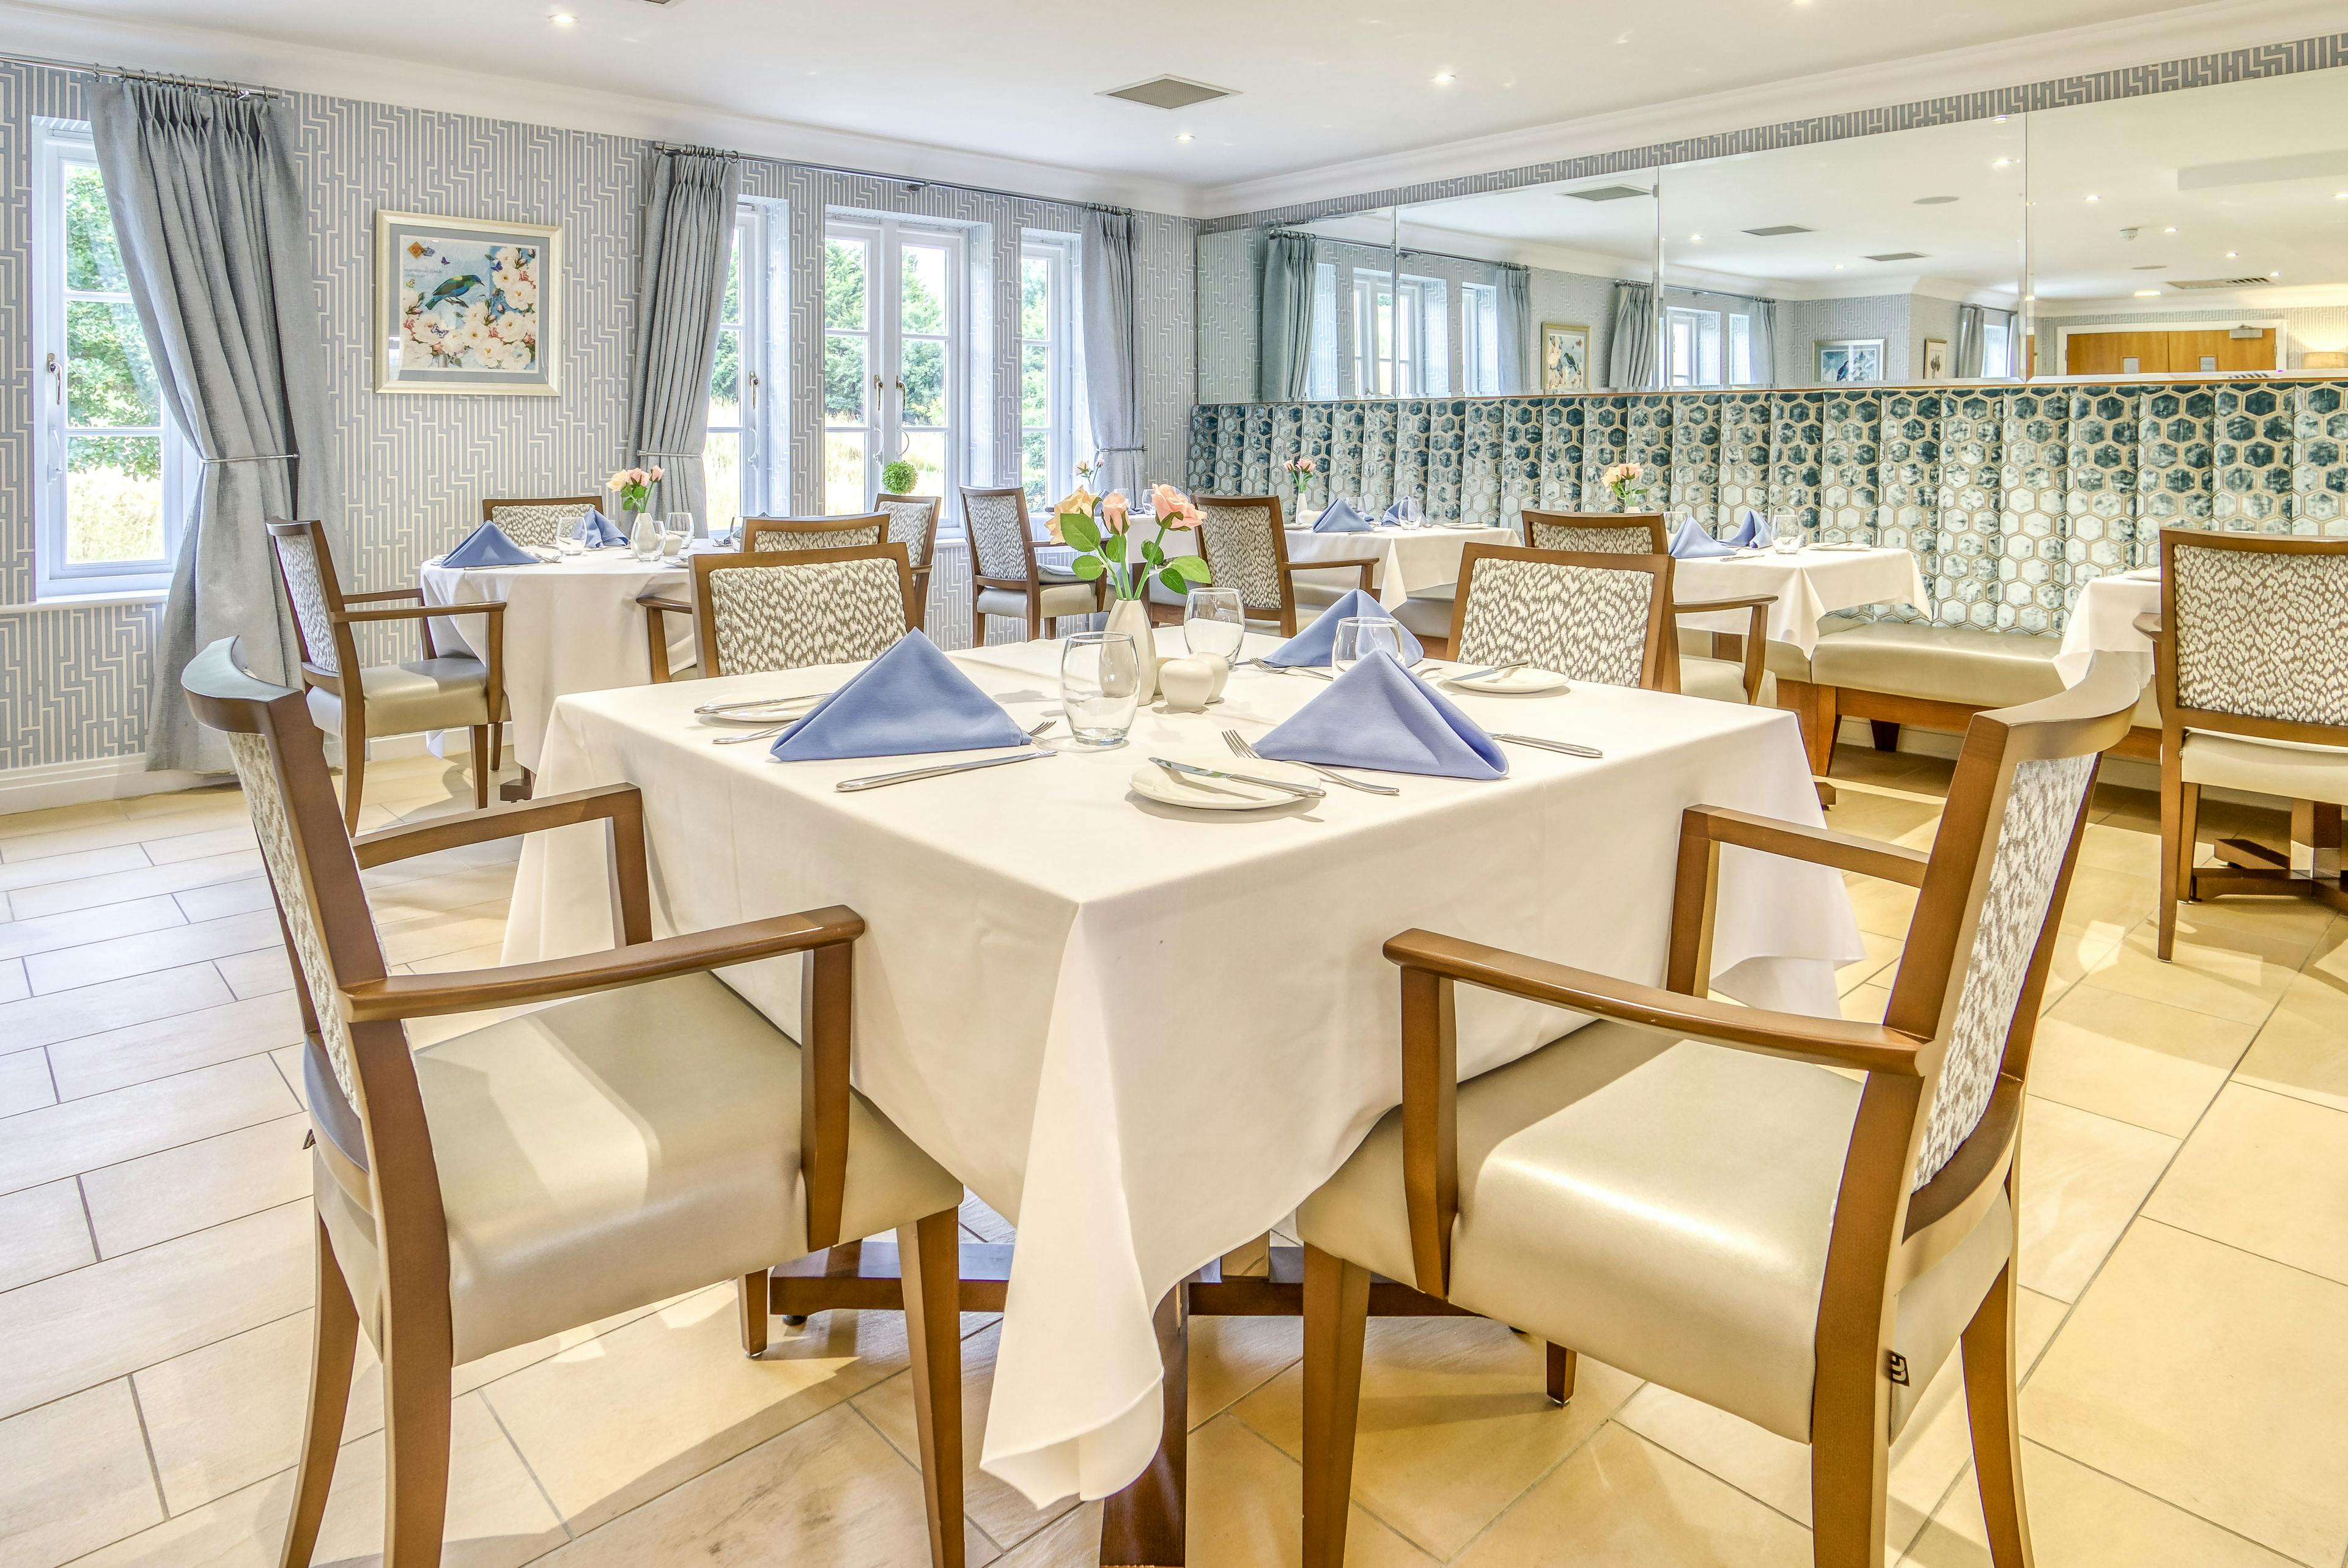 Dining area of Painswick care home in Painswick, Gloucestershire